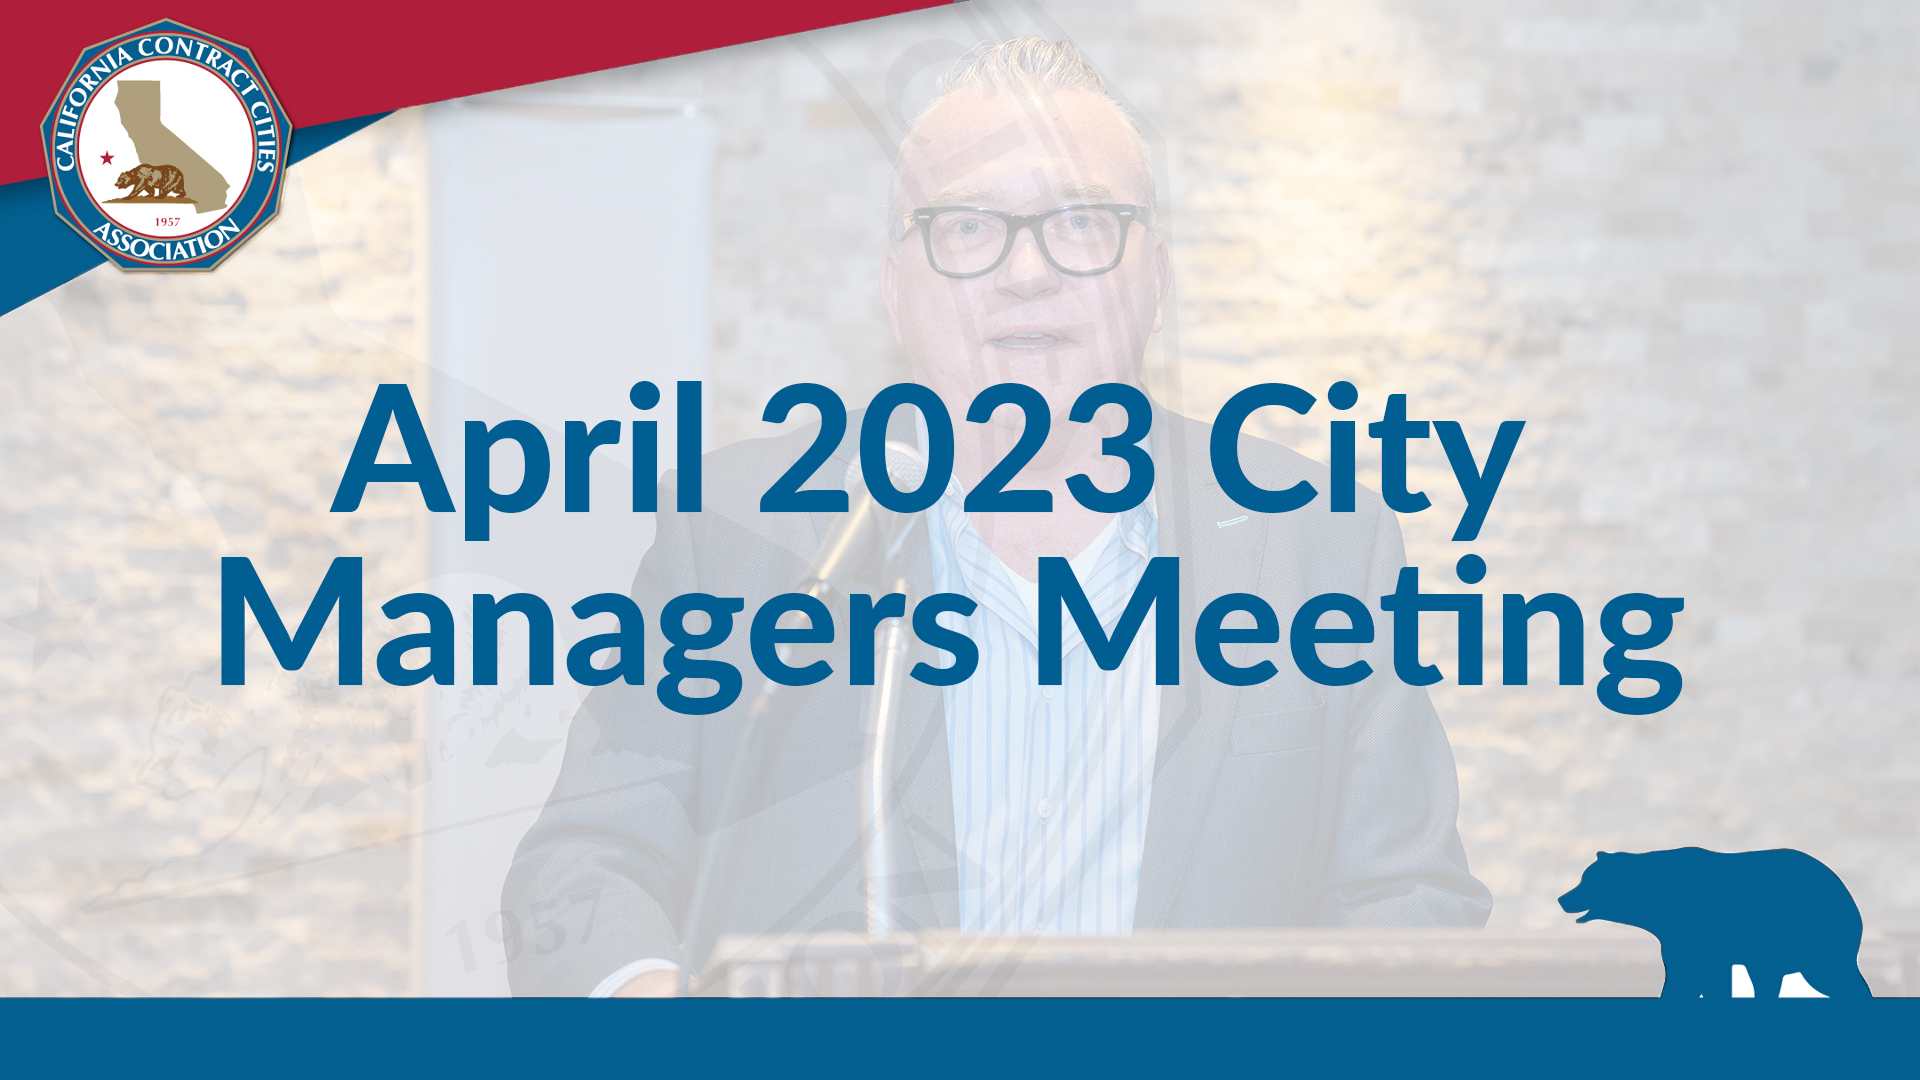 April 2023 City Managers Meeting